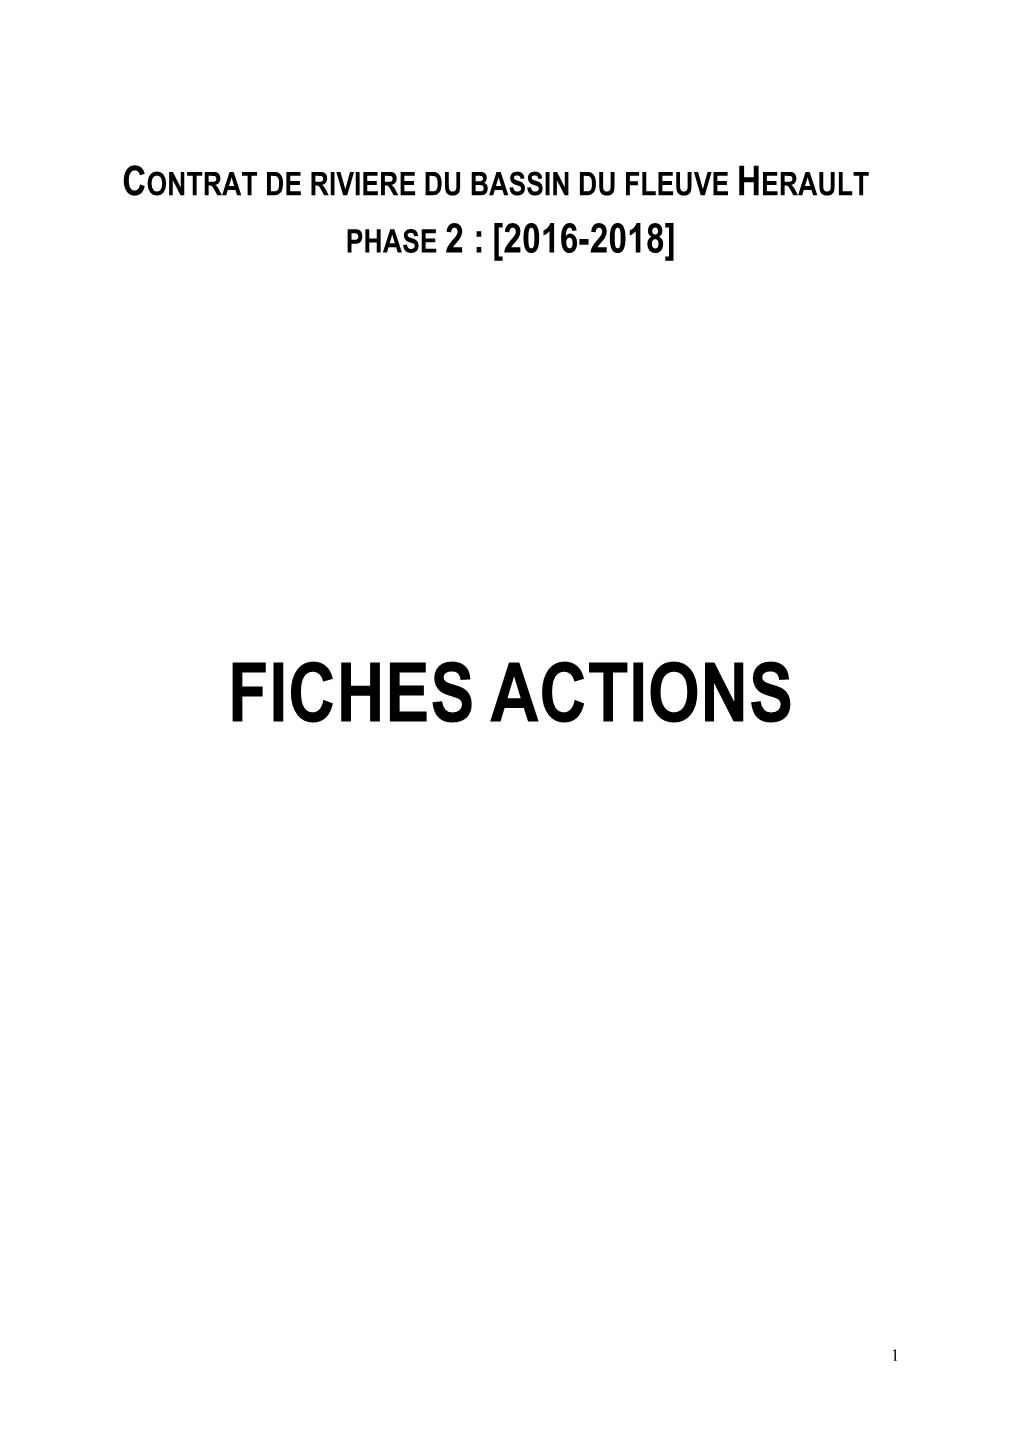 Fichesactions